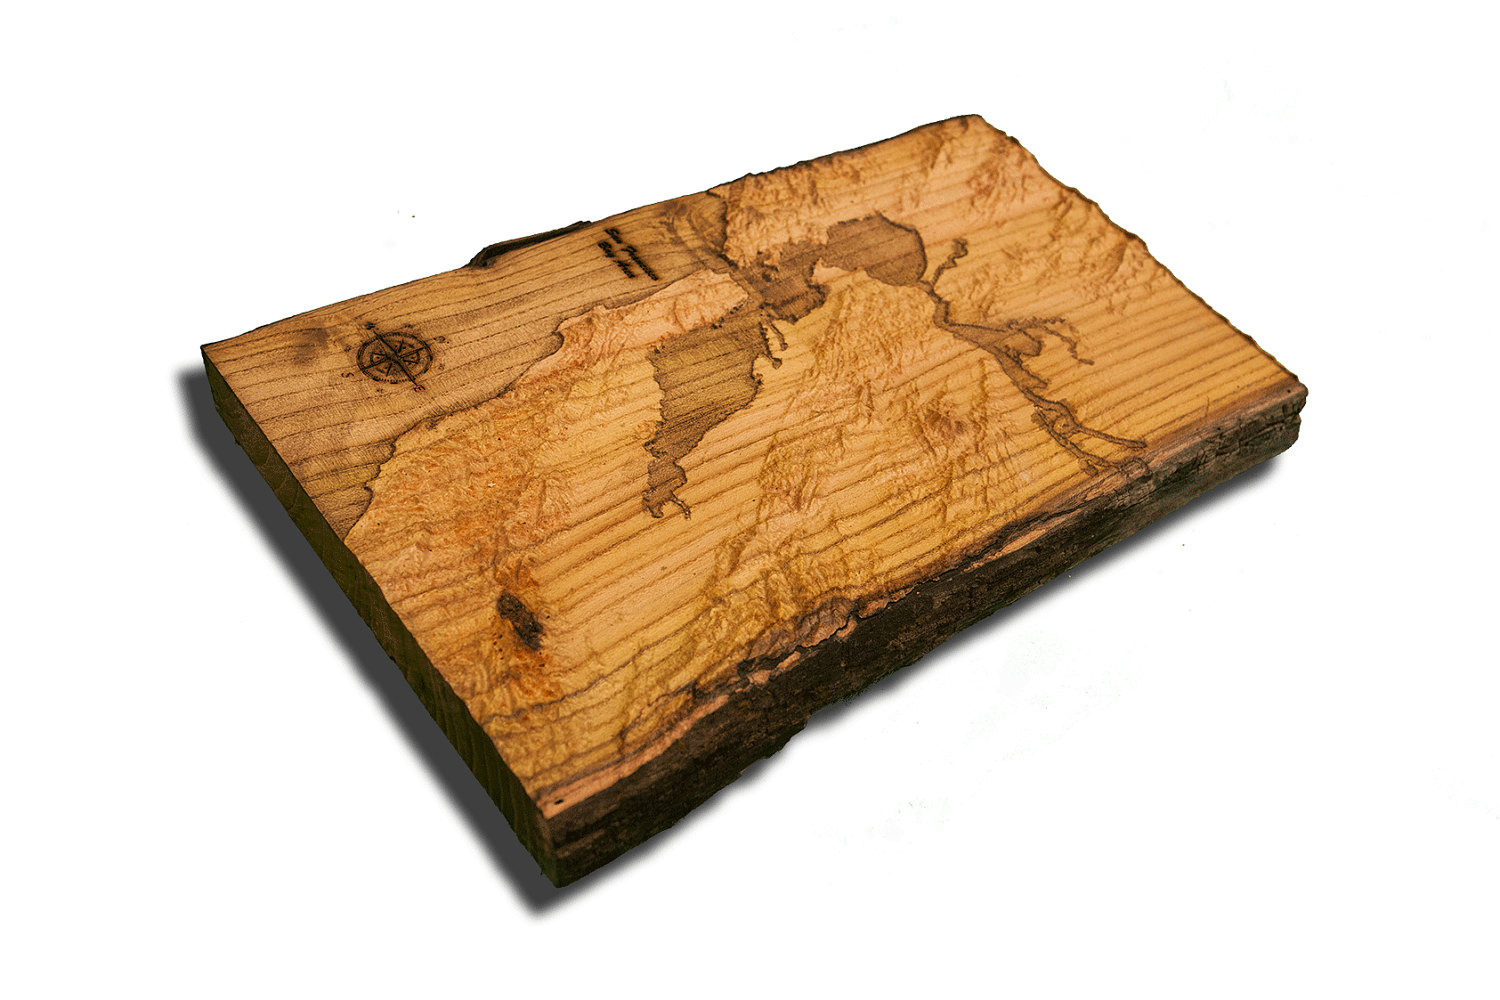 San Francisco Bay Area Topographical Map from a natural live edge wood slab,  California, vintage, rustic fine art one of a kind piece.